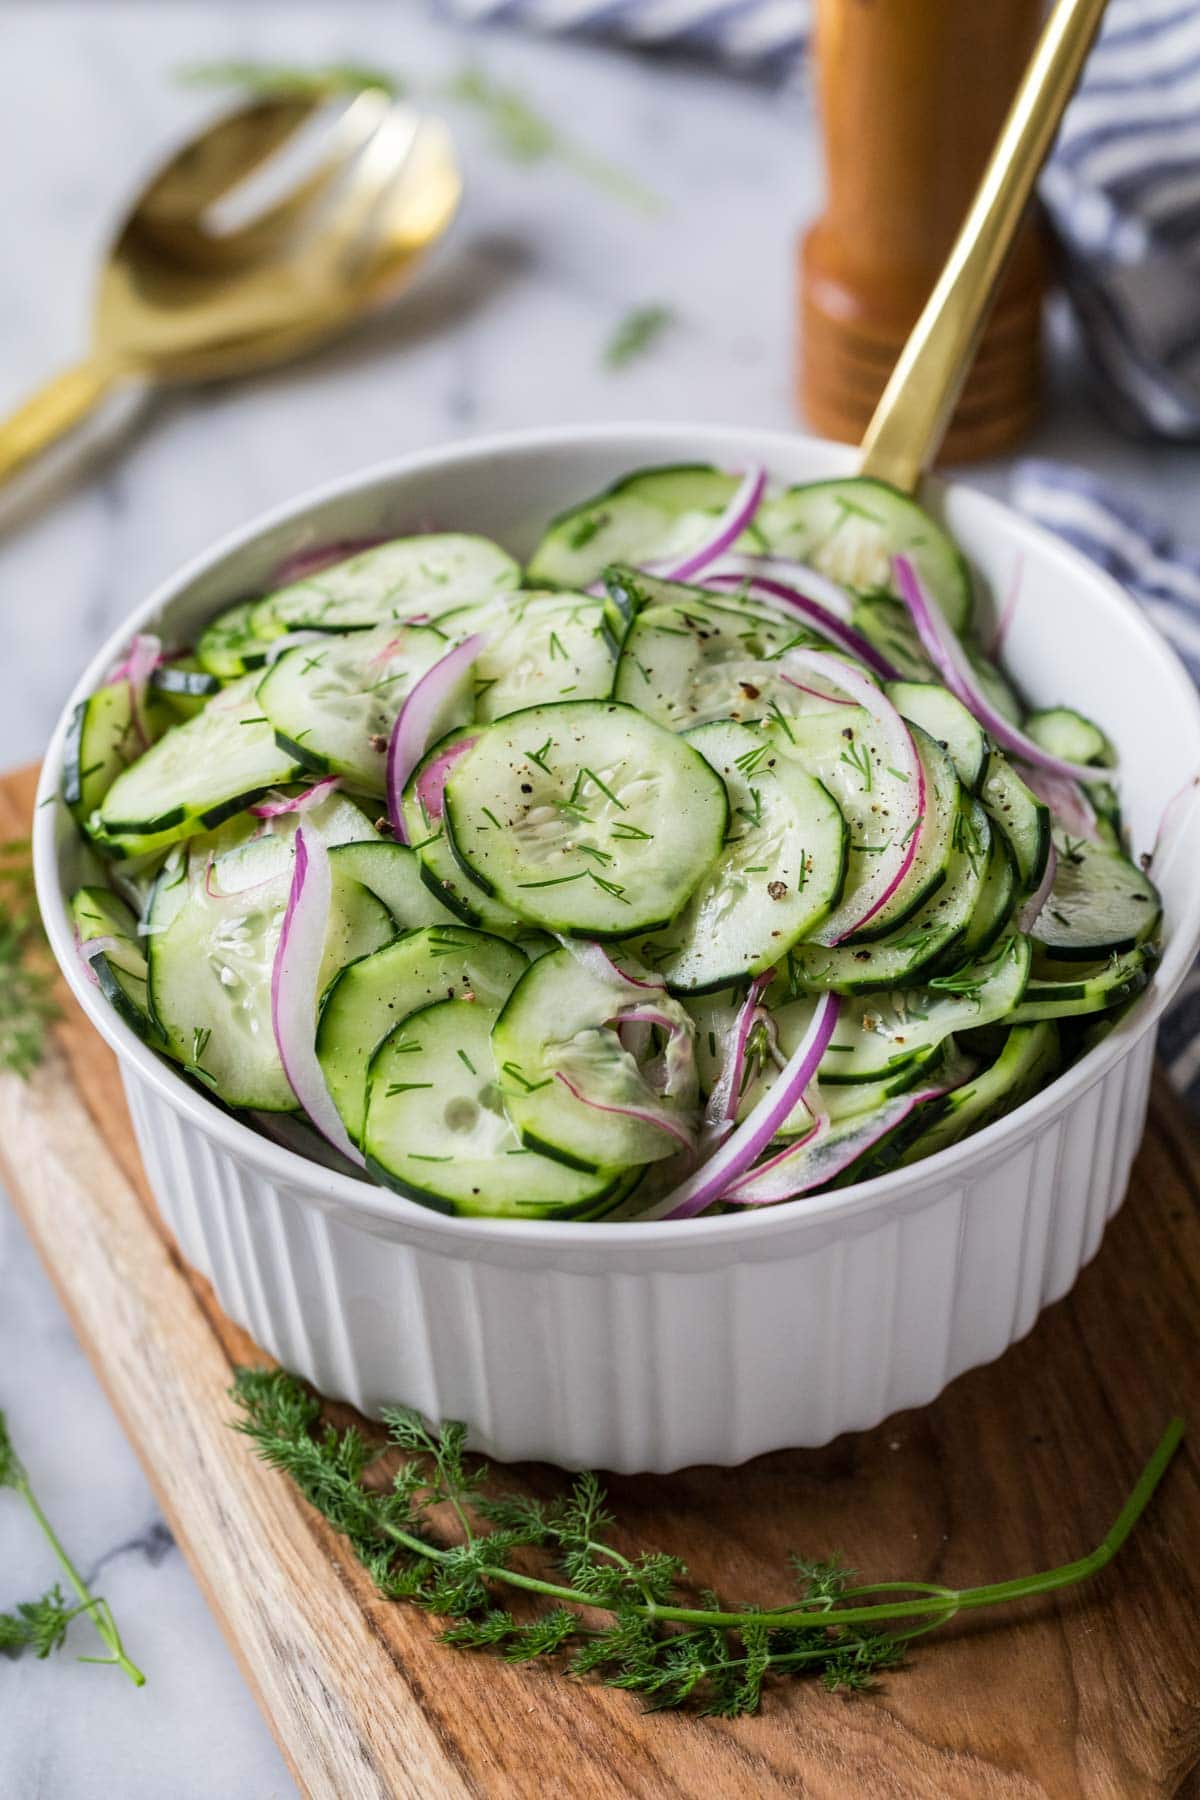 Salad made with cucumbers, red onion, and dill in a white serving bowl.